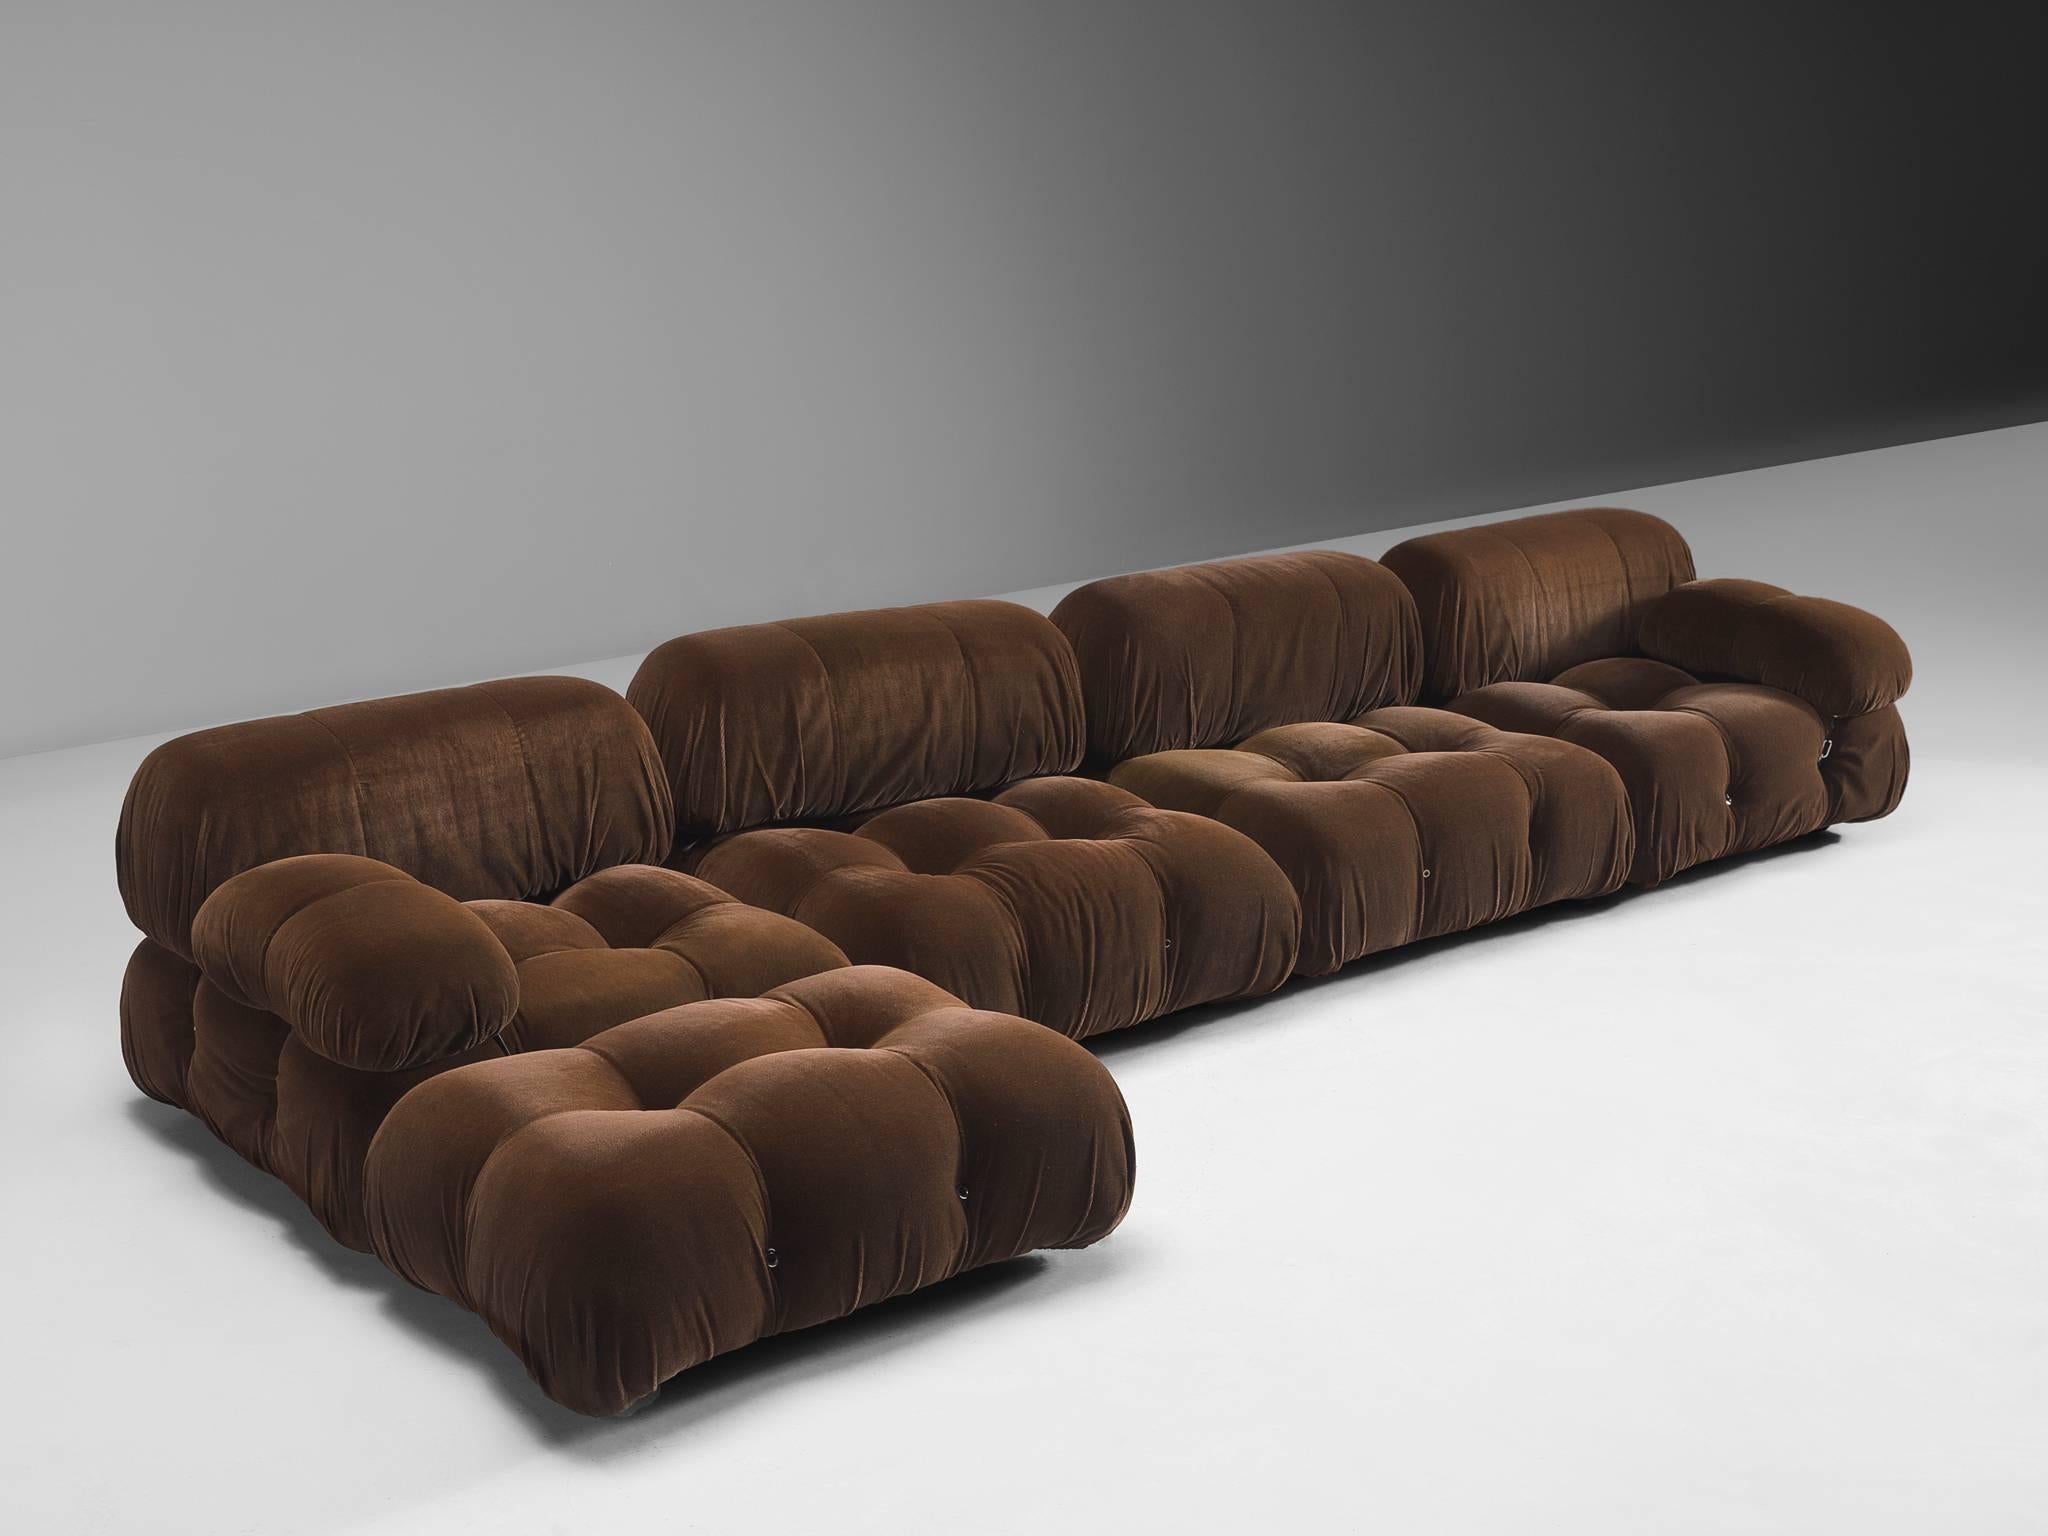 Mario Bellini, modular 'Cameleonda' sofa in original brown fabric, Italy, 1972.

The sectional elements of this can be used freely and apart from one another. The backs and armrests are provided with rings and carabiners, which allows the user to